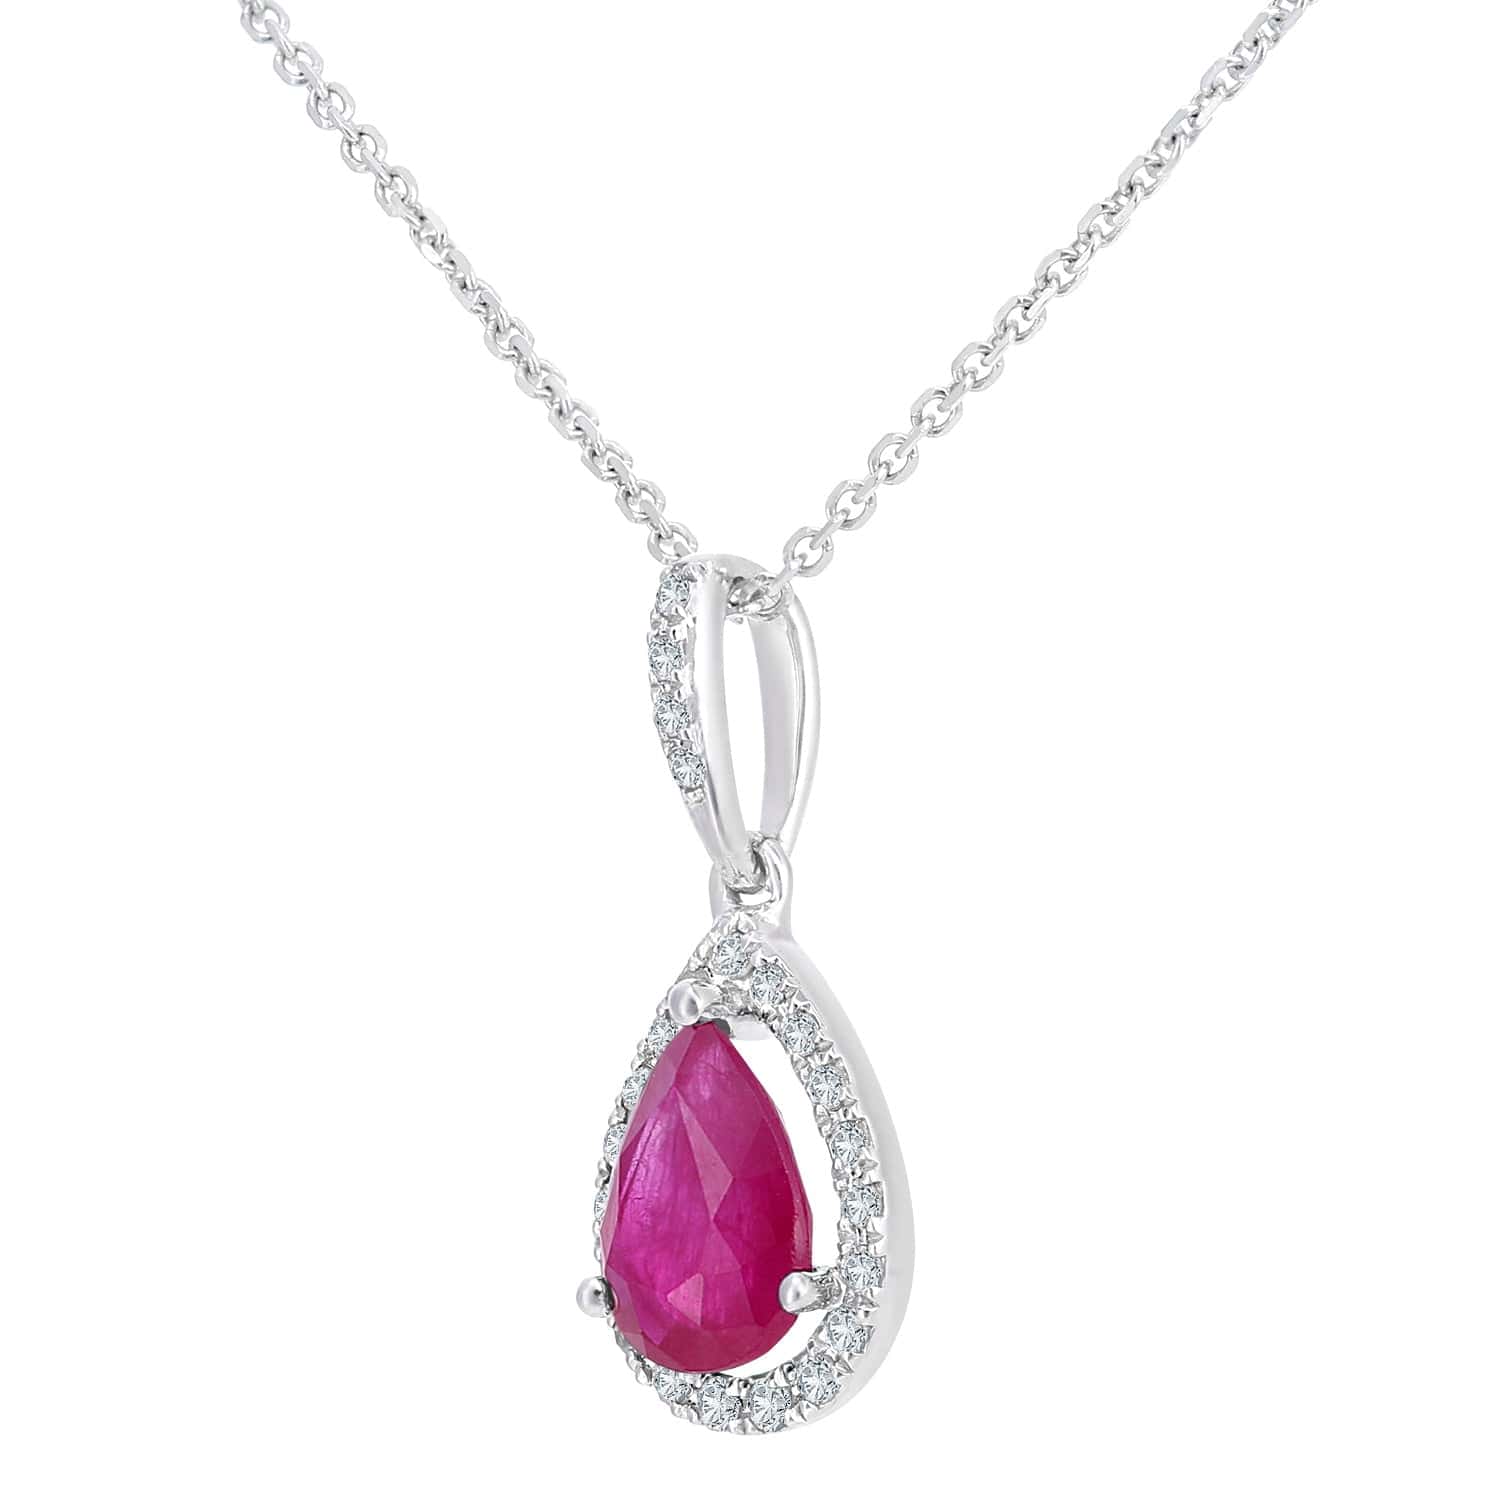 Lynora Luxe Pendant White Gold 9ct / Ruby 9ct White Gold Ruby and Diamond Teardrop Pendant Necklace